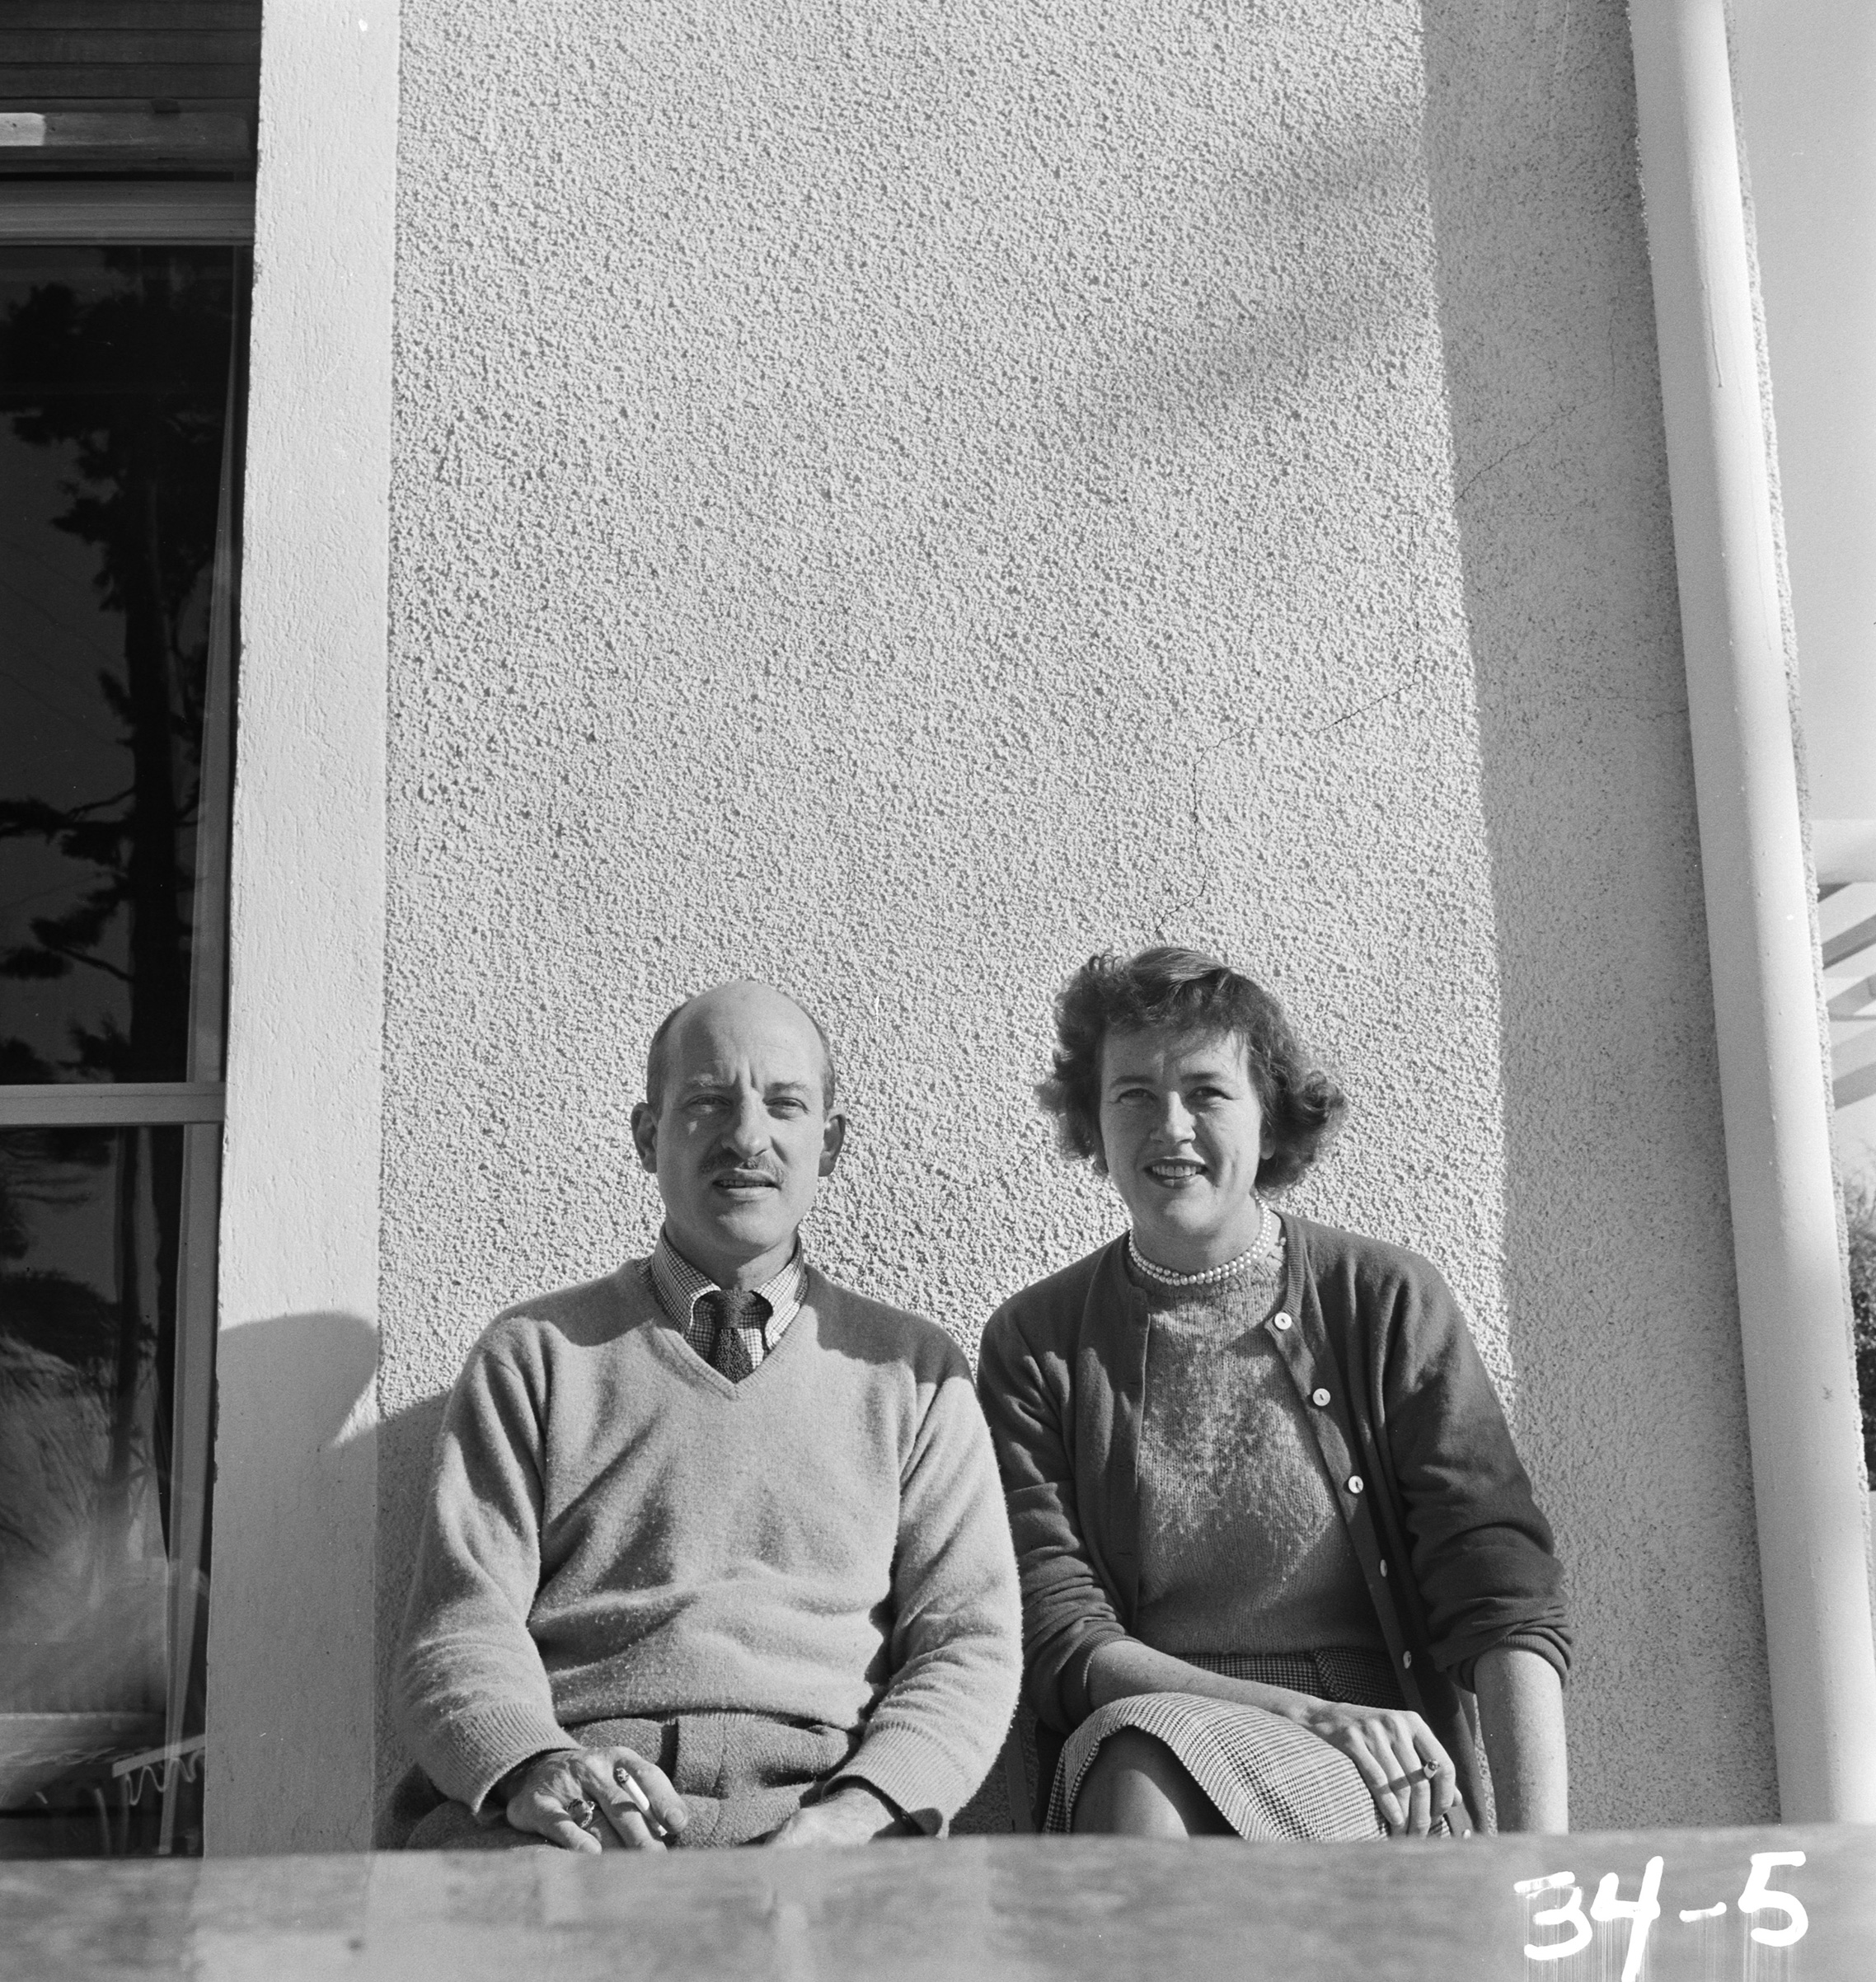 Julia Child by her husband Paul Child in France in the 1950s.